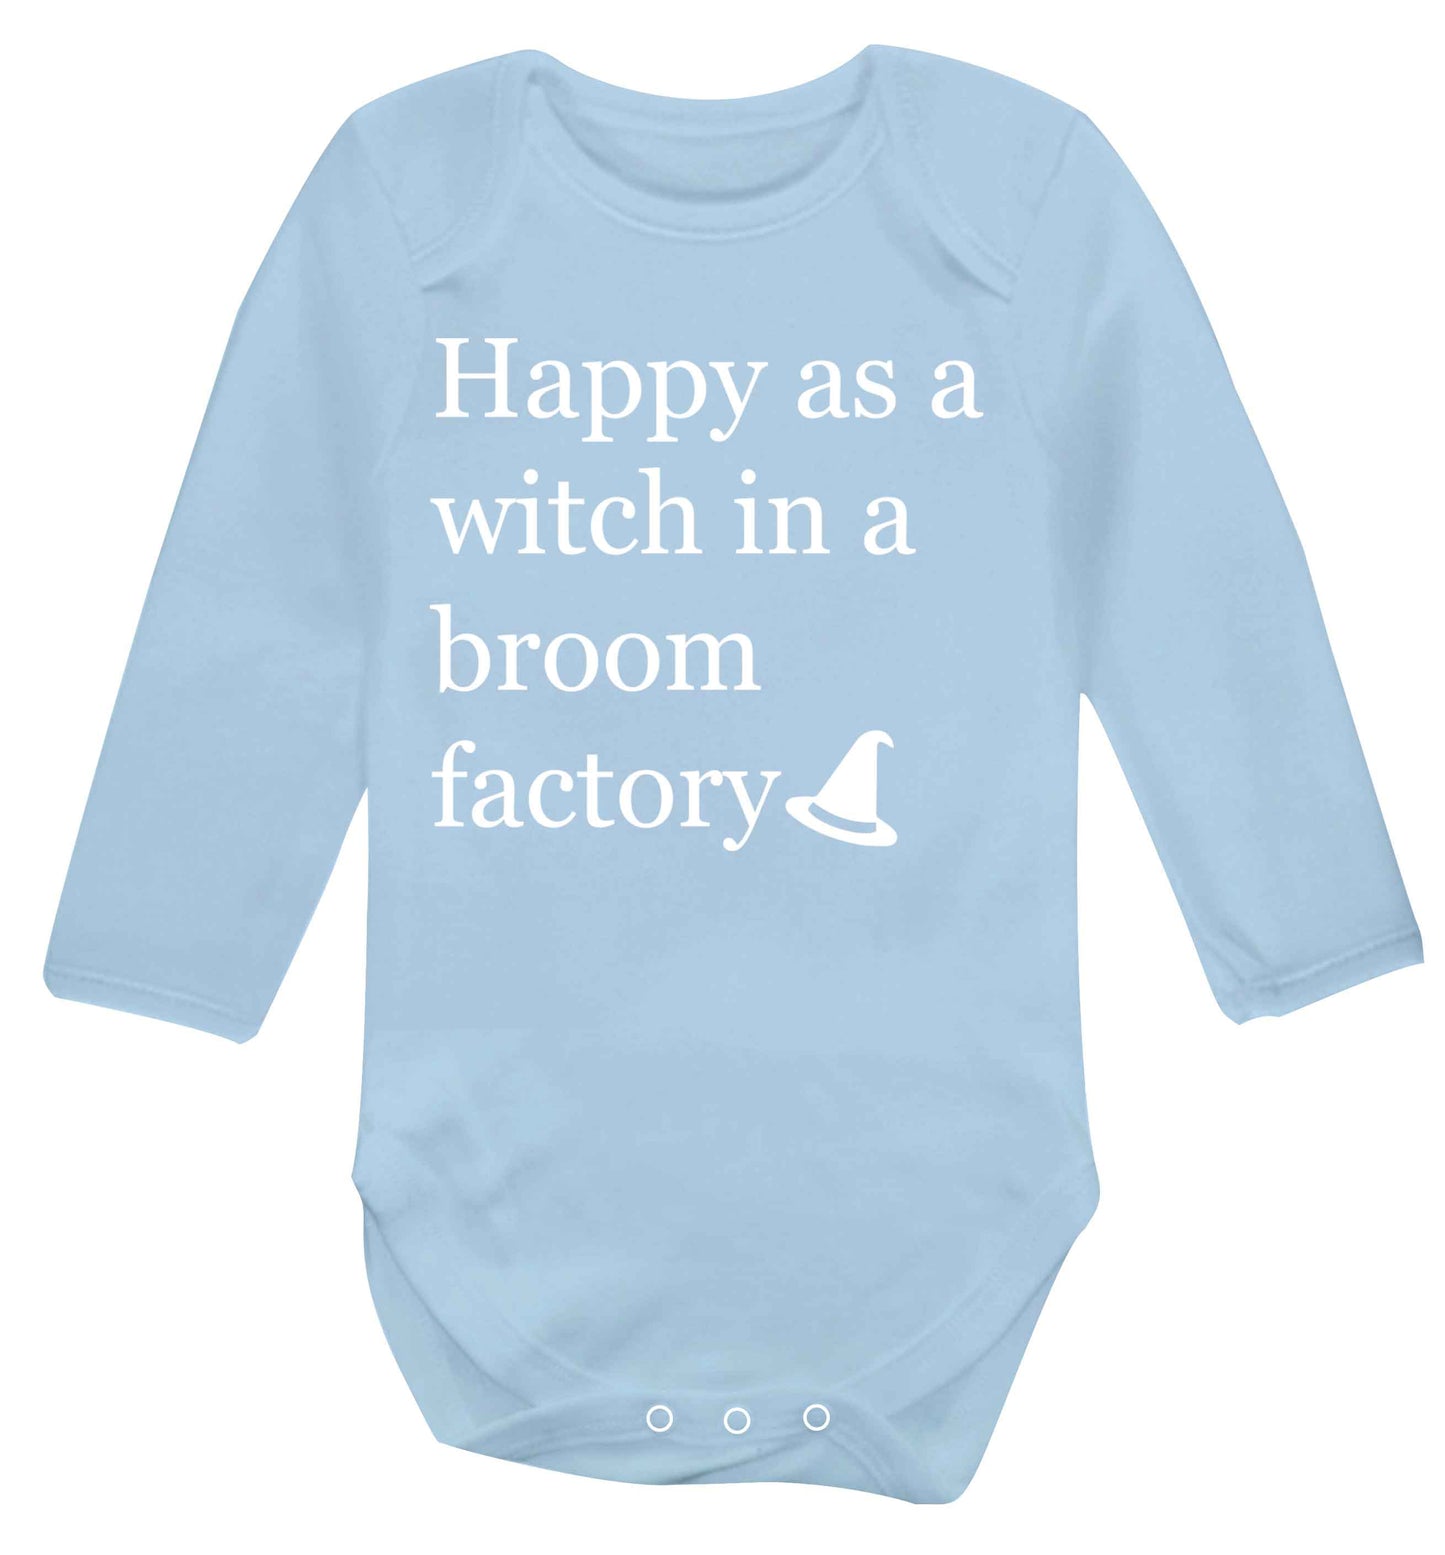 Happy as a witch in a broom factory Baby Vest long sleeved pale blue 6-12 months